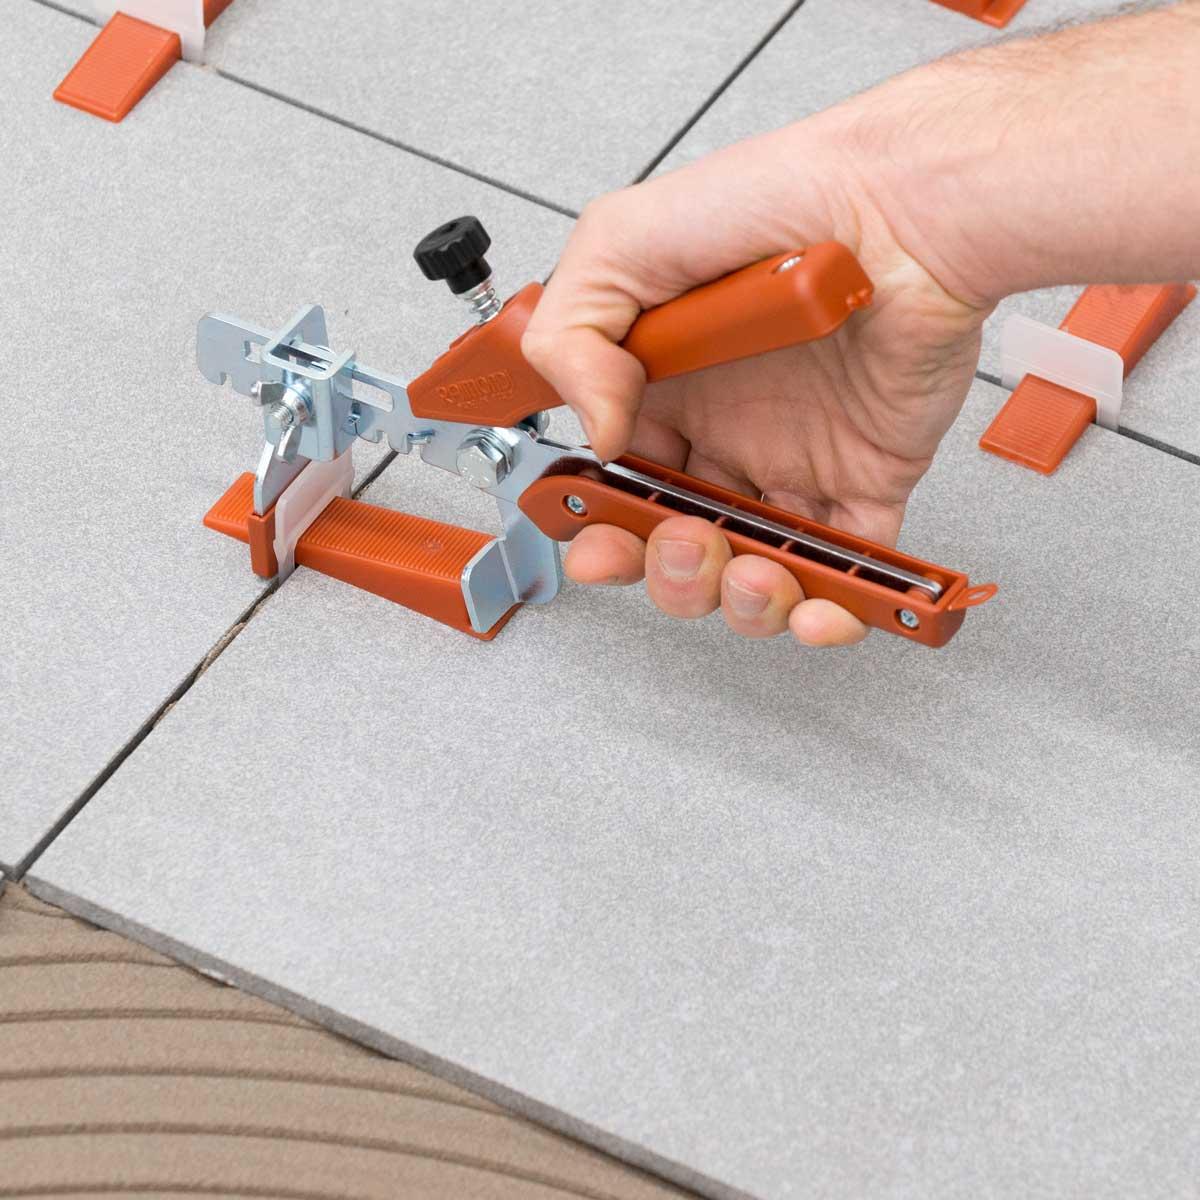 Wedges Tiling Flooring Tools Portable Tile Leveling Spacer System Tool Clips